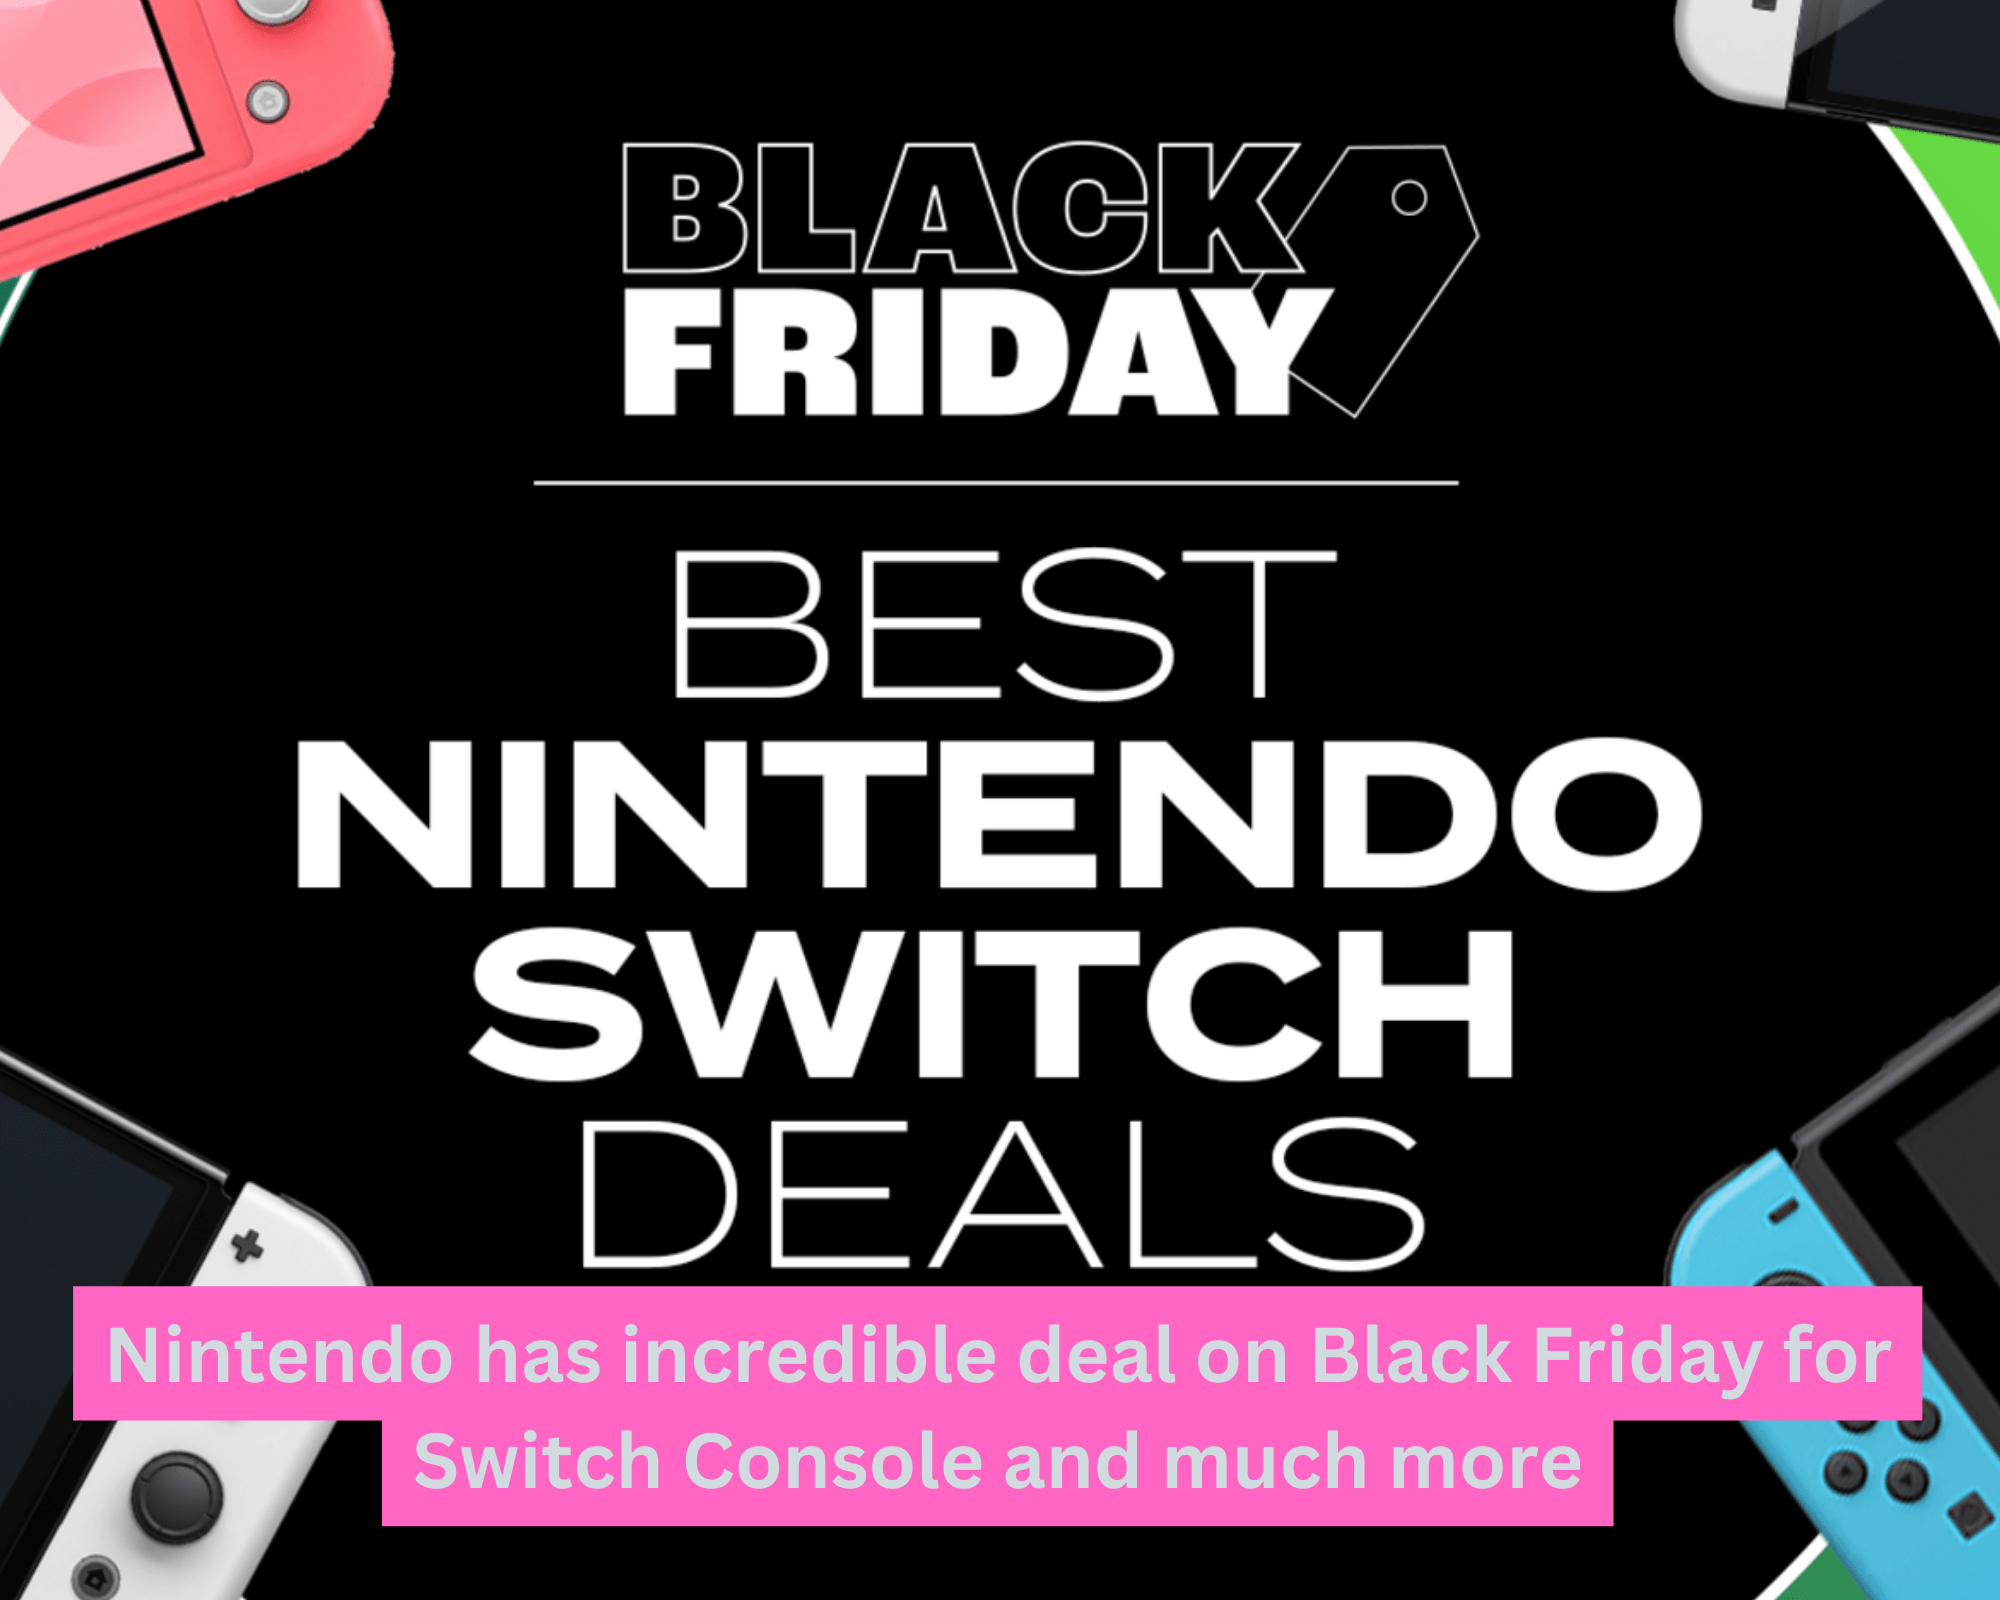 Nintendo has incredible deal on Black Friday for Switch Console and much more